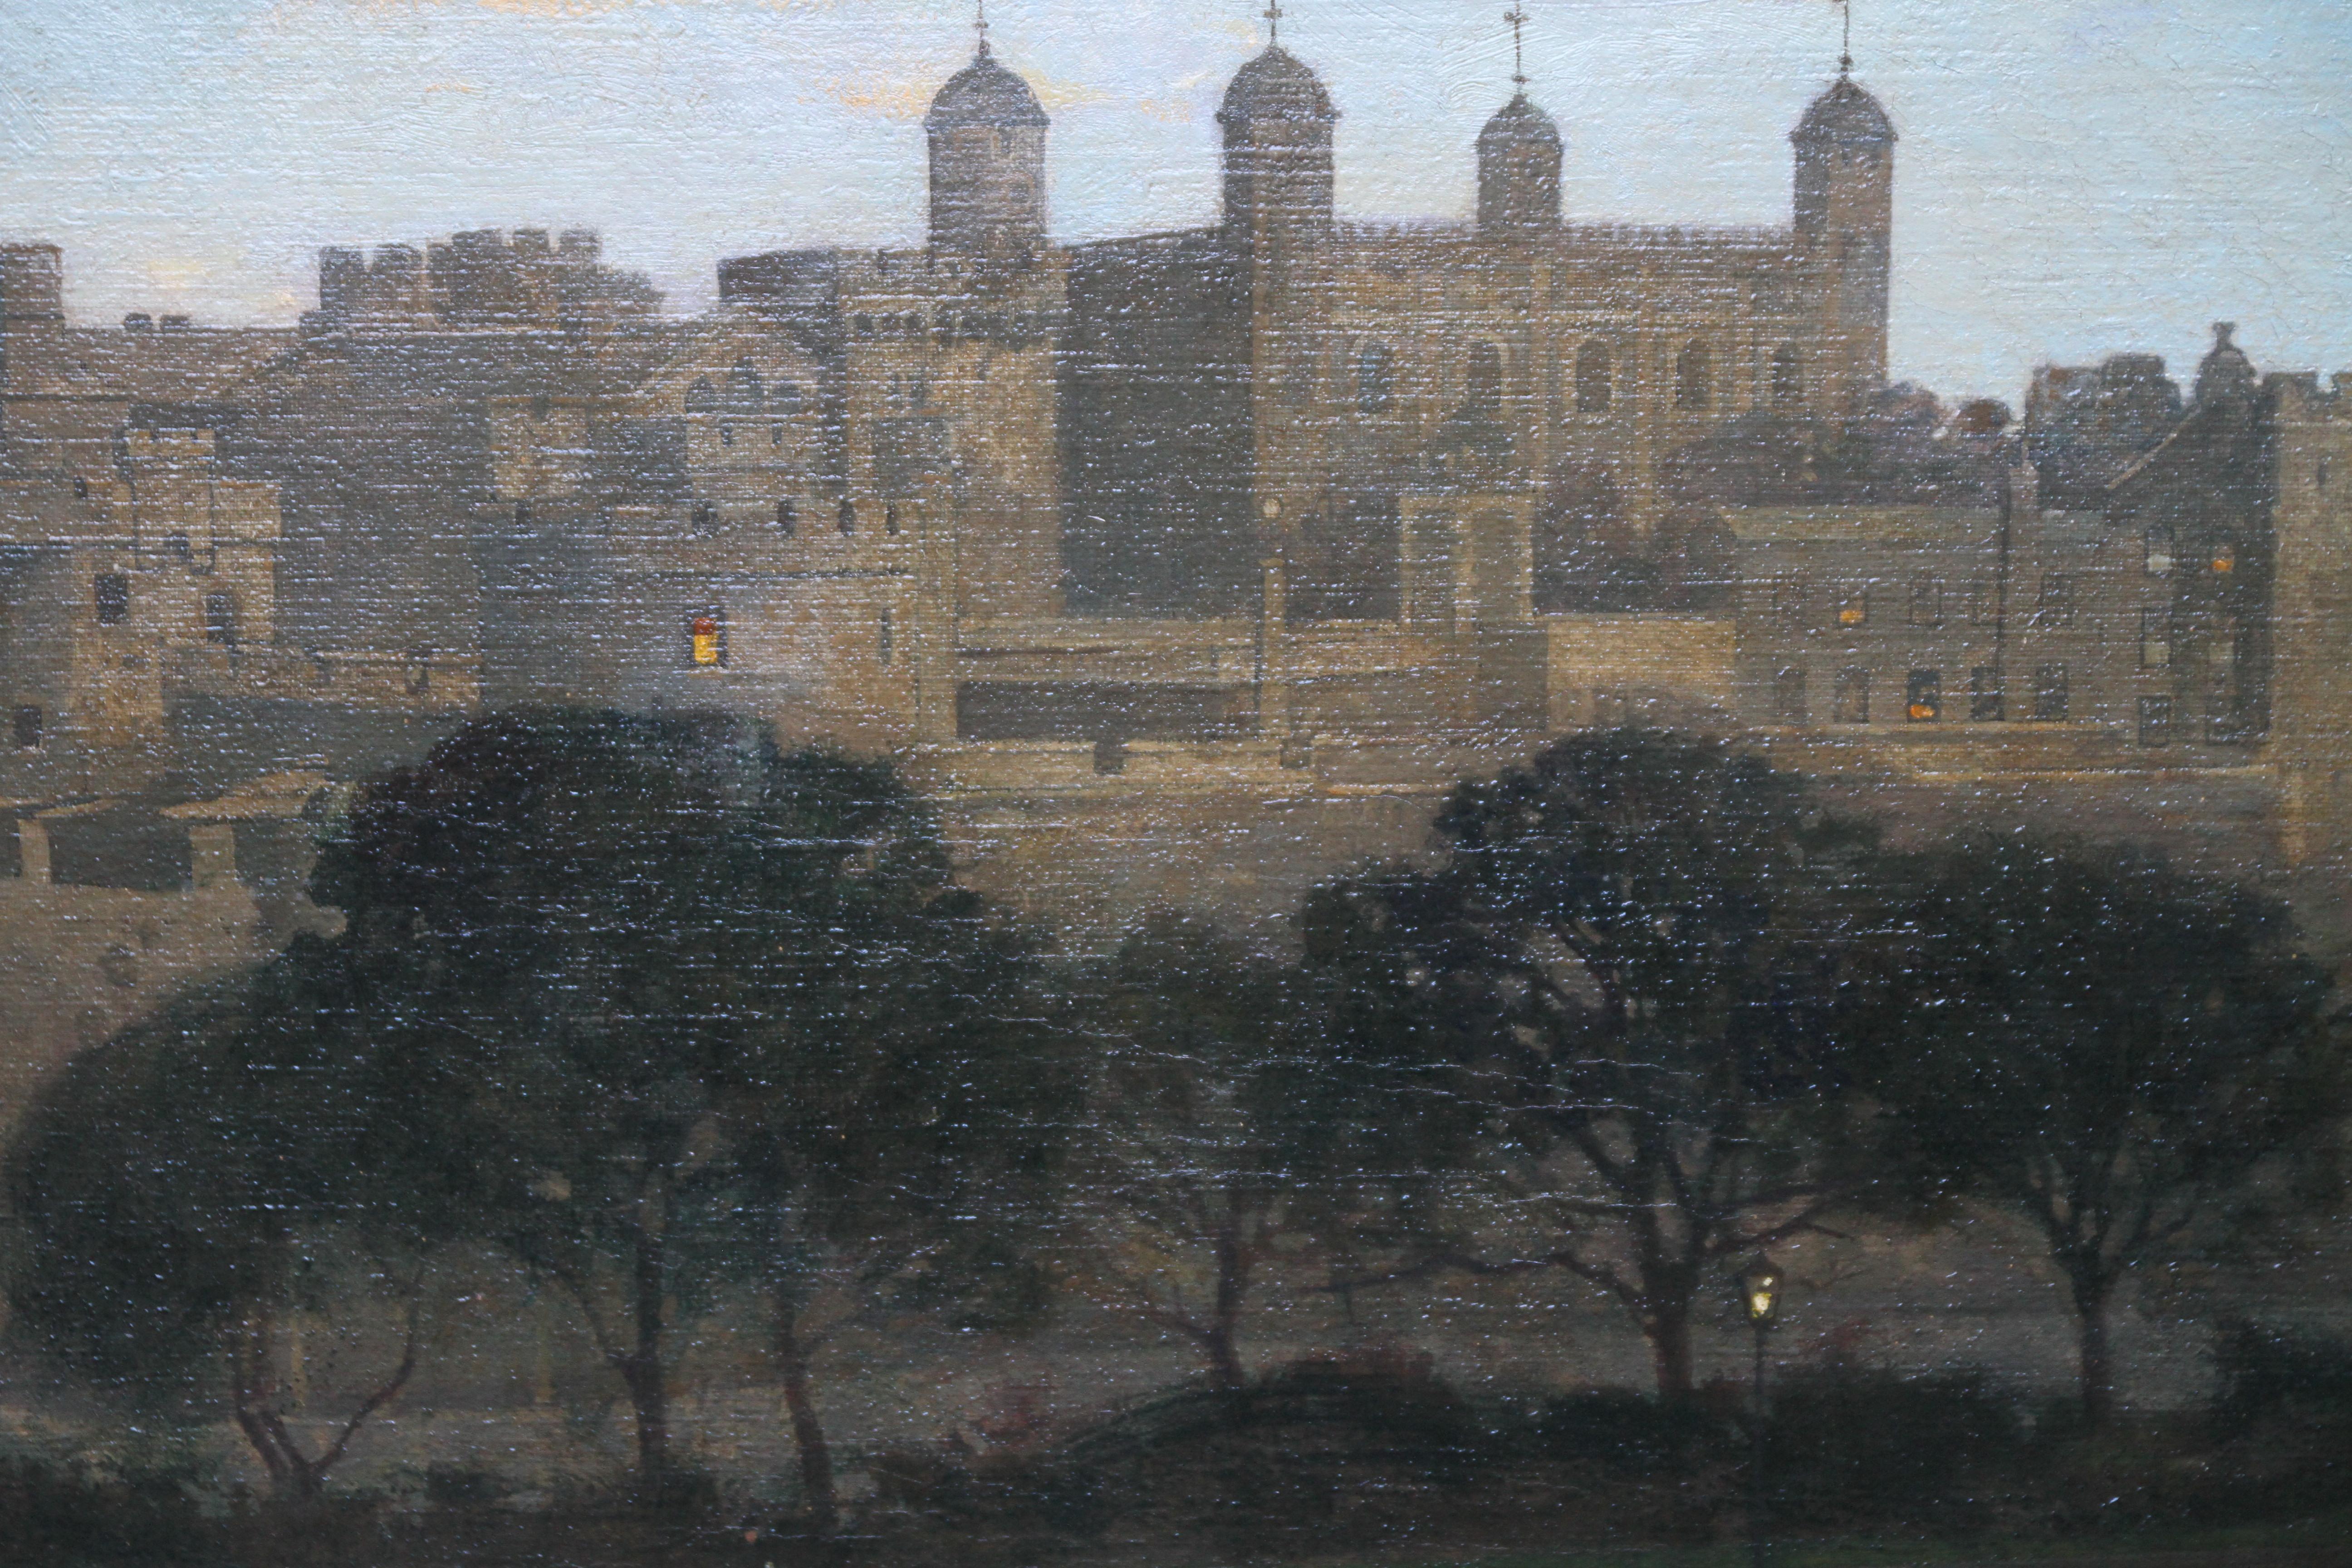 A really lovely oil on canvas painting by noted British artist William Dacres Adams. It was painted circa 1920 and depicts the Tower of London at night. A fine nocturne, the glow of the Tower light contrasts with those in the street. A superb